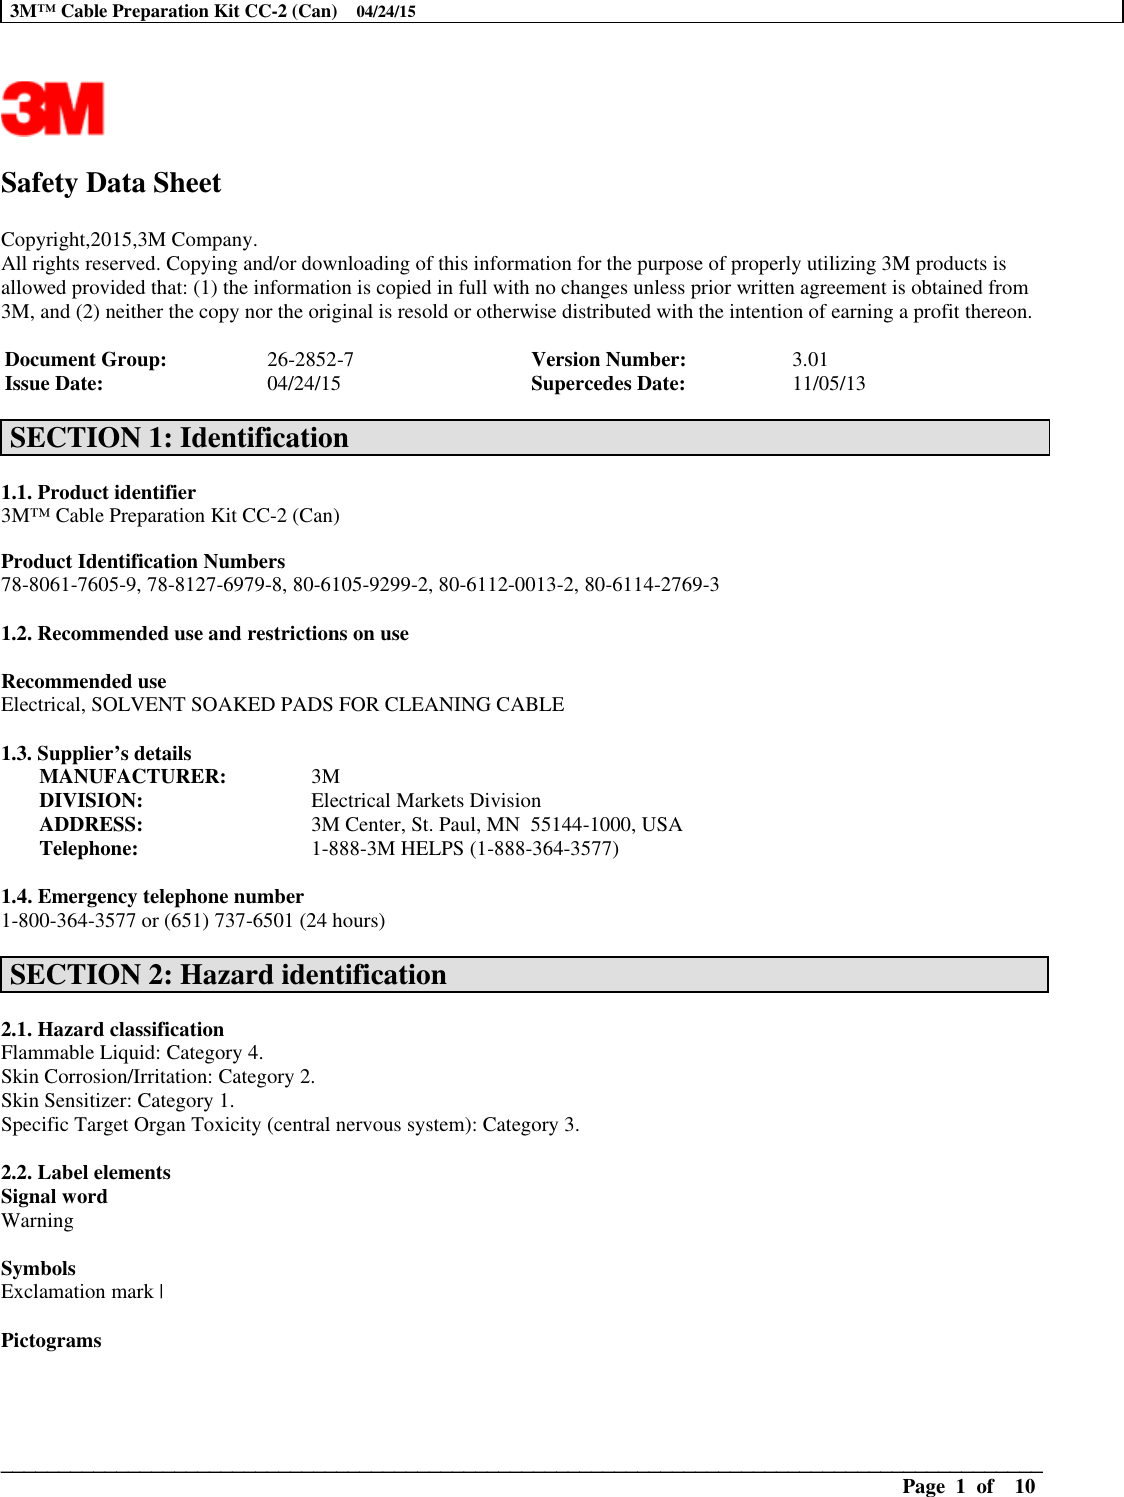 Page 3 of 12 - 127200-MSDS